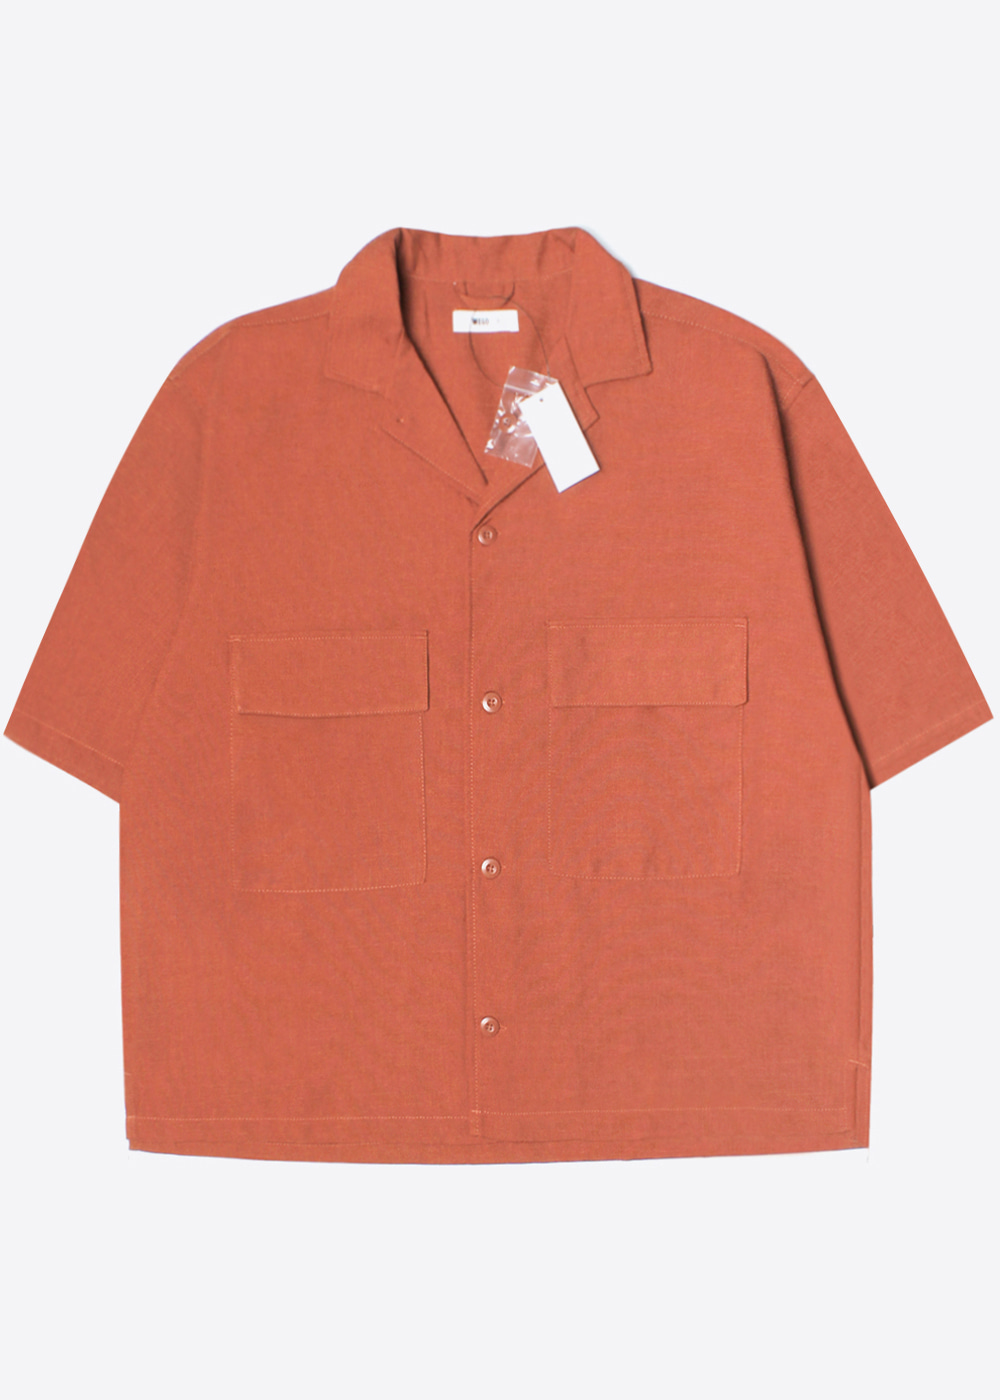 WEGO‘over fit’ poly open collar shirt